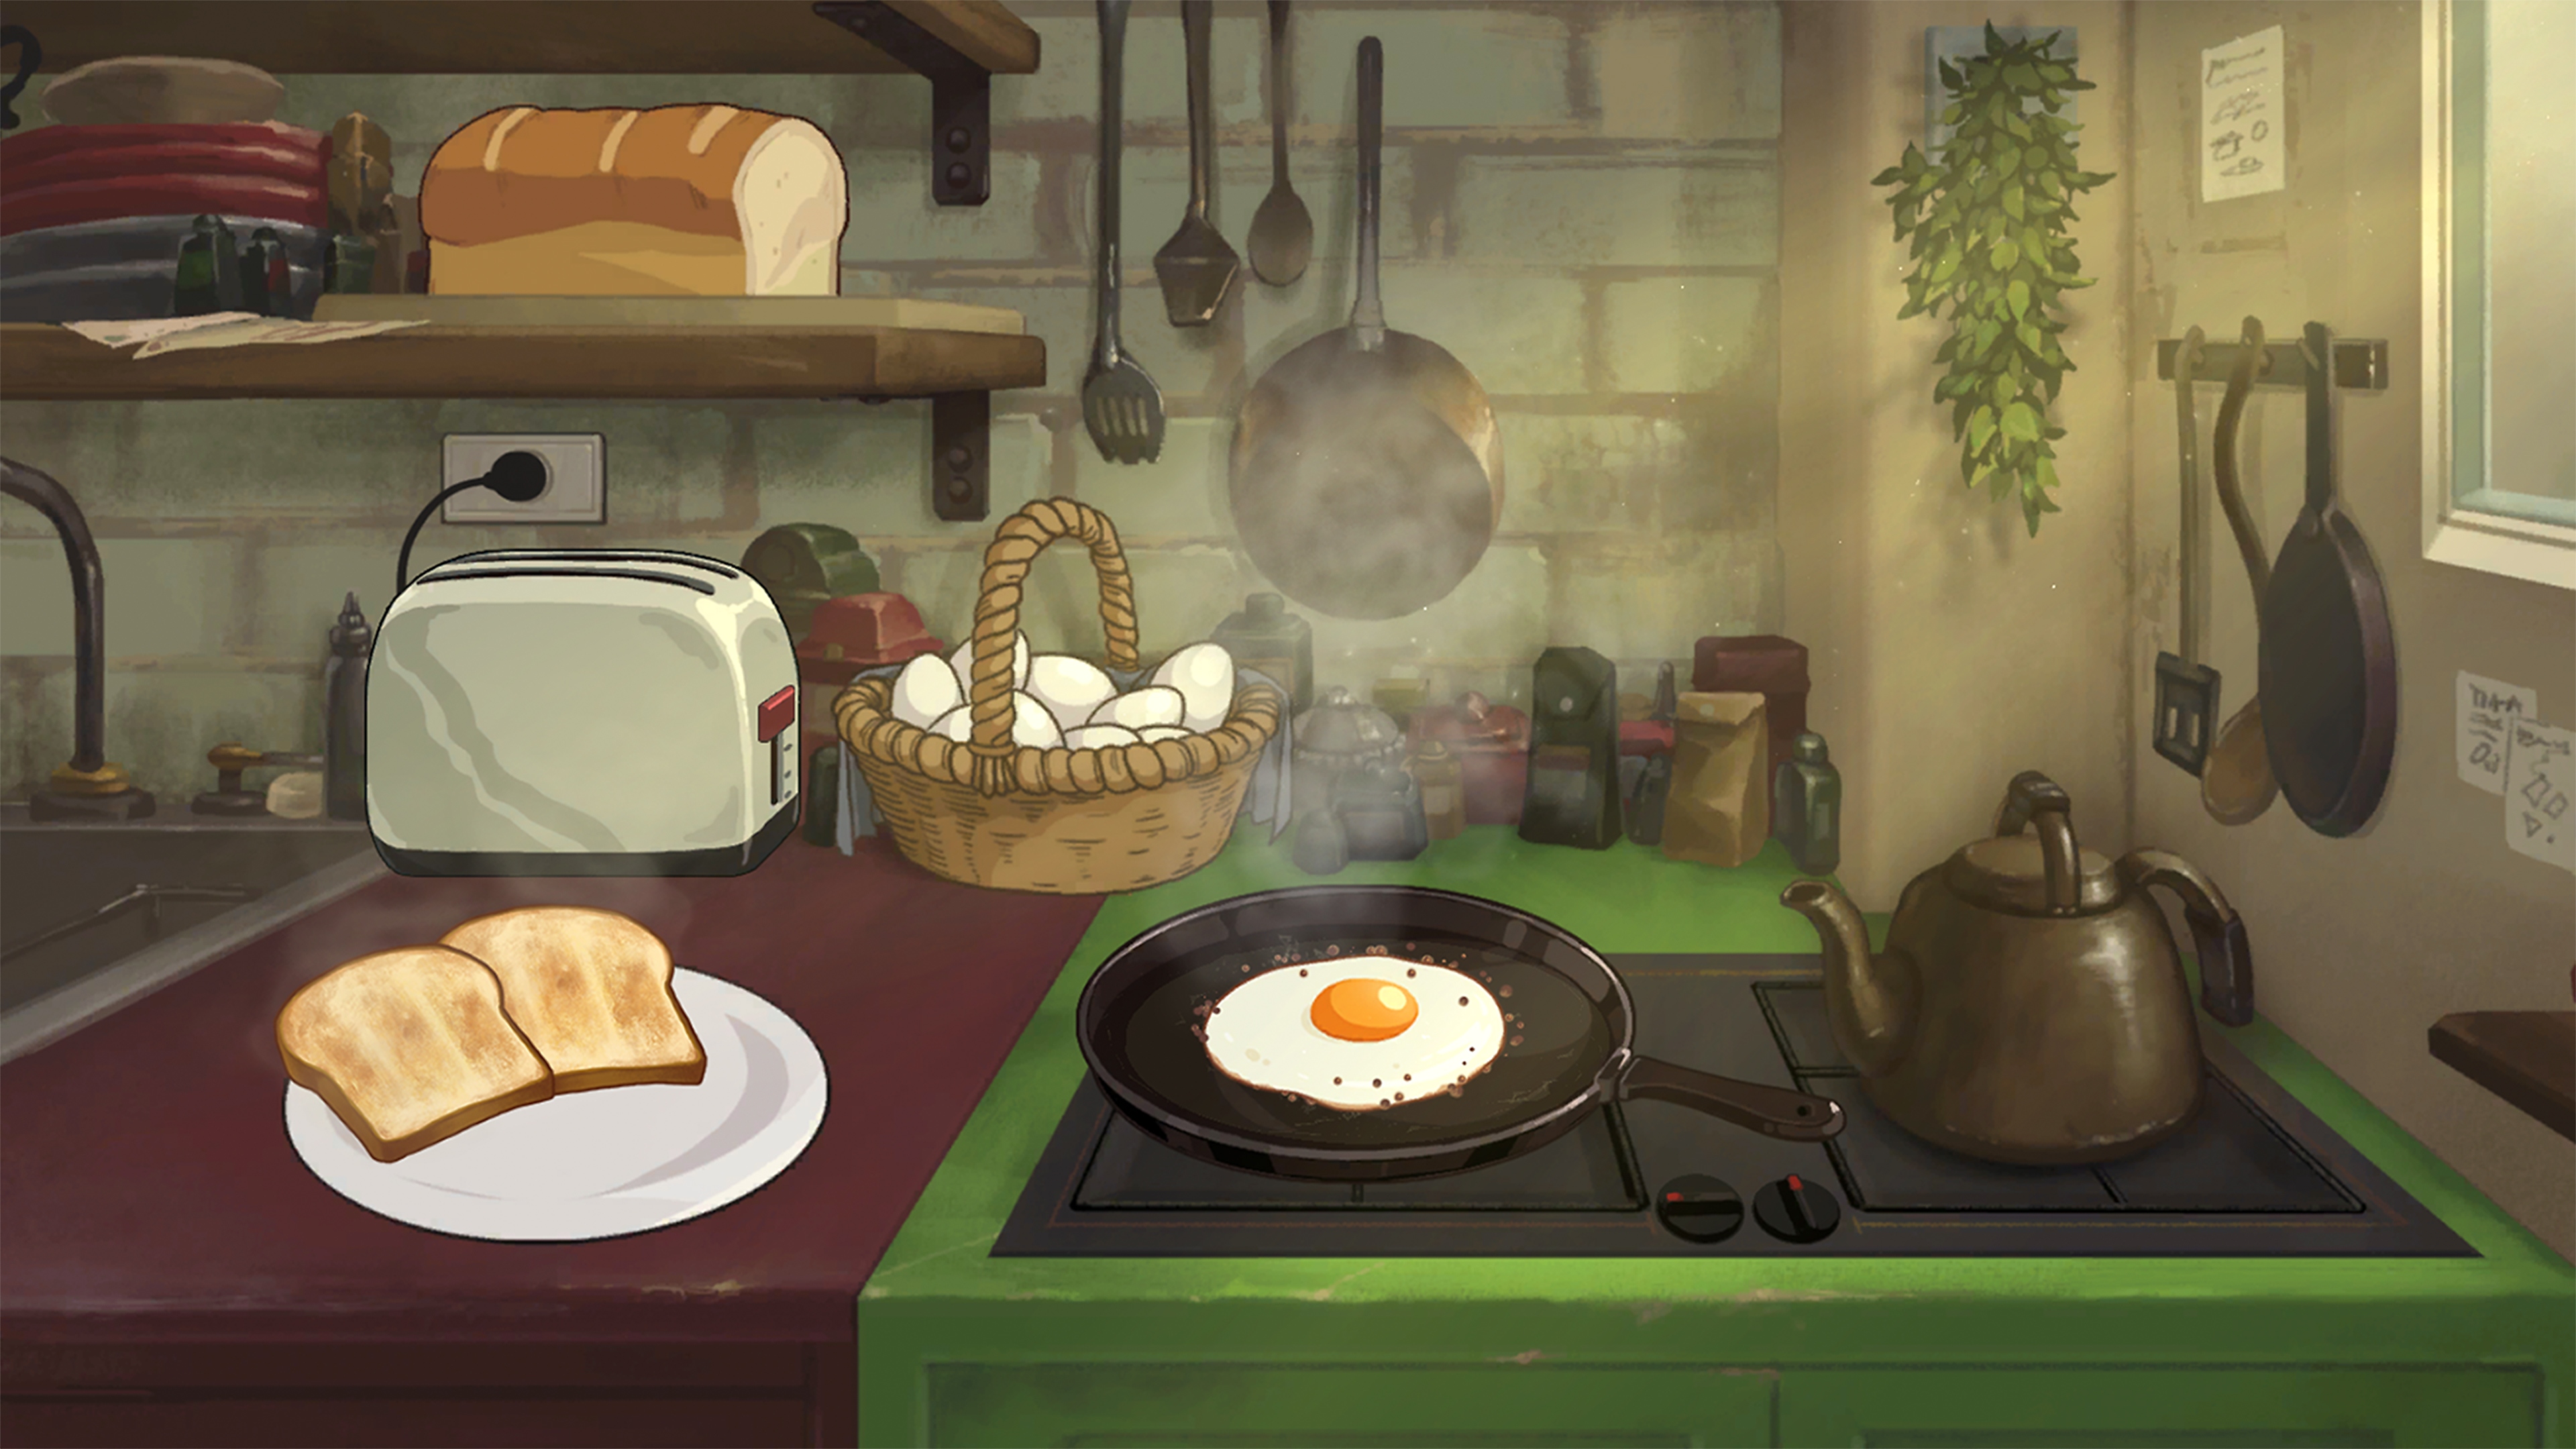 Behind the Frame: The Finest Scenery screenshot showing breakfast being prepared on a stove